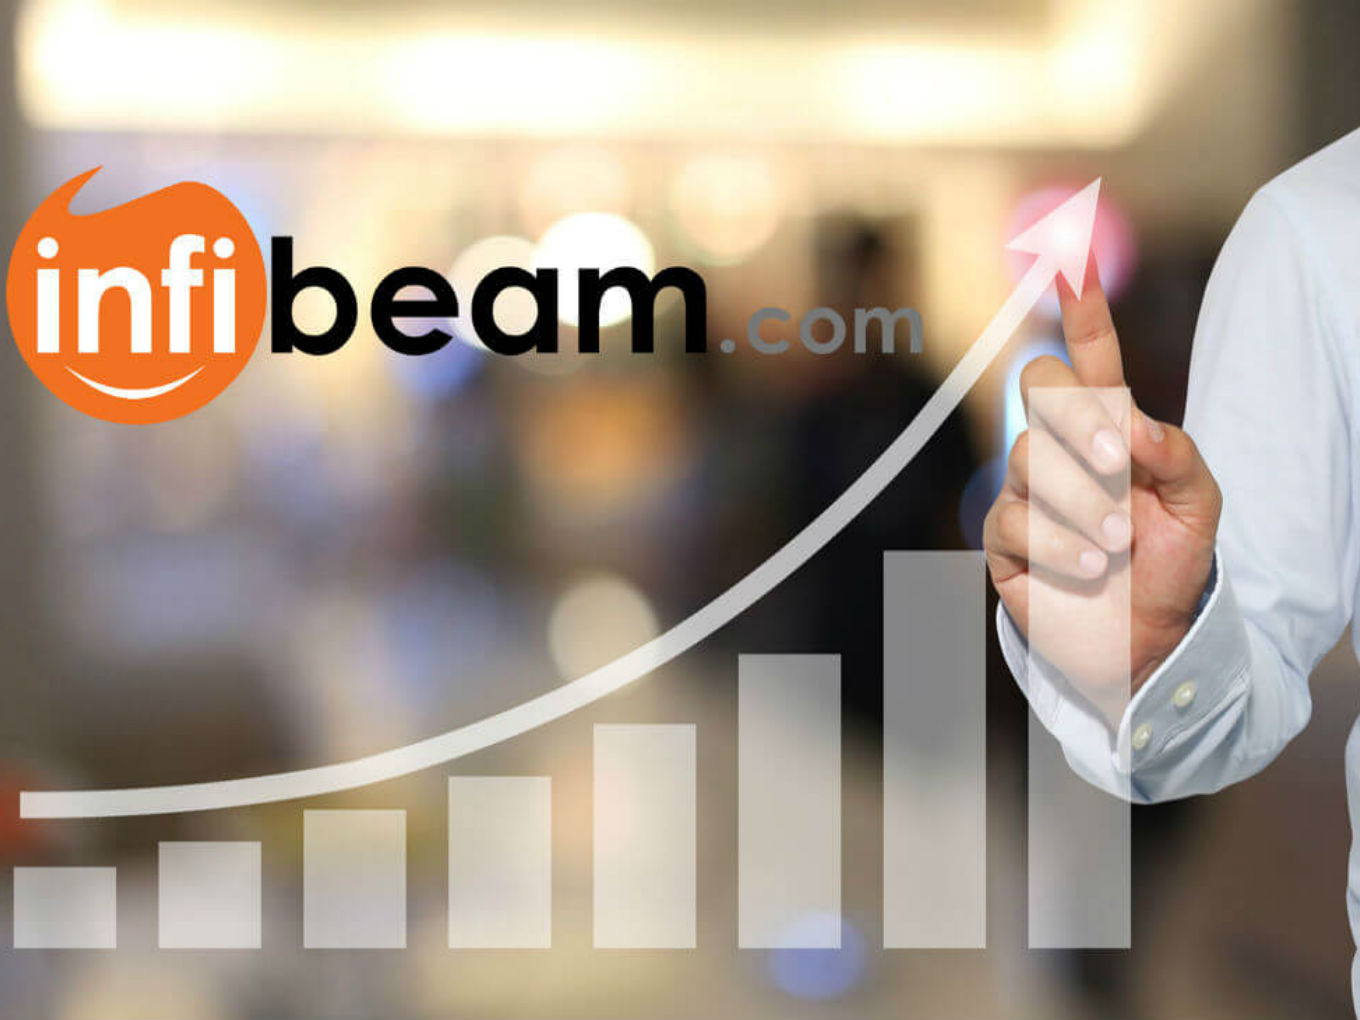 Infibeam Posted A 26% Increase In Revenues For Q1 FY2019 Amid Talks To Raise $292 Mn